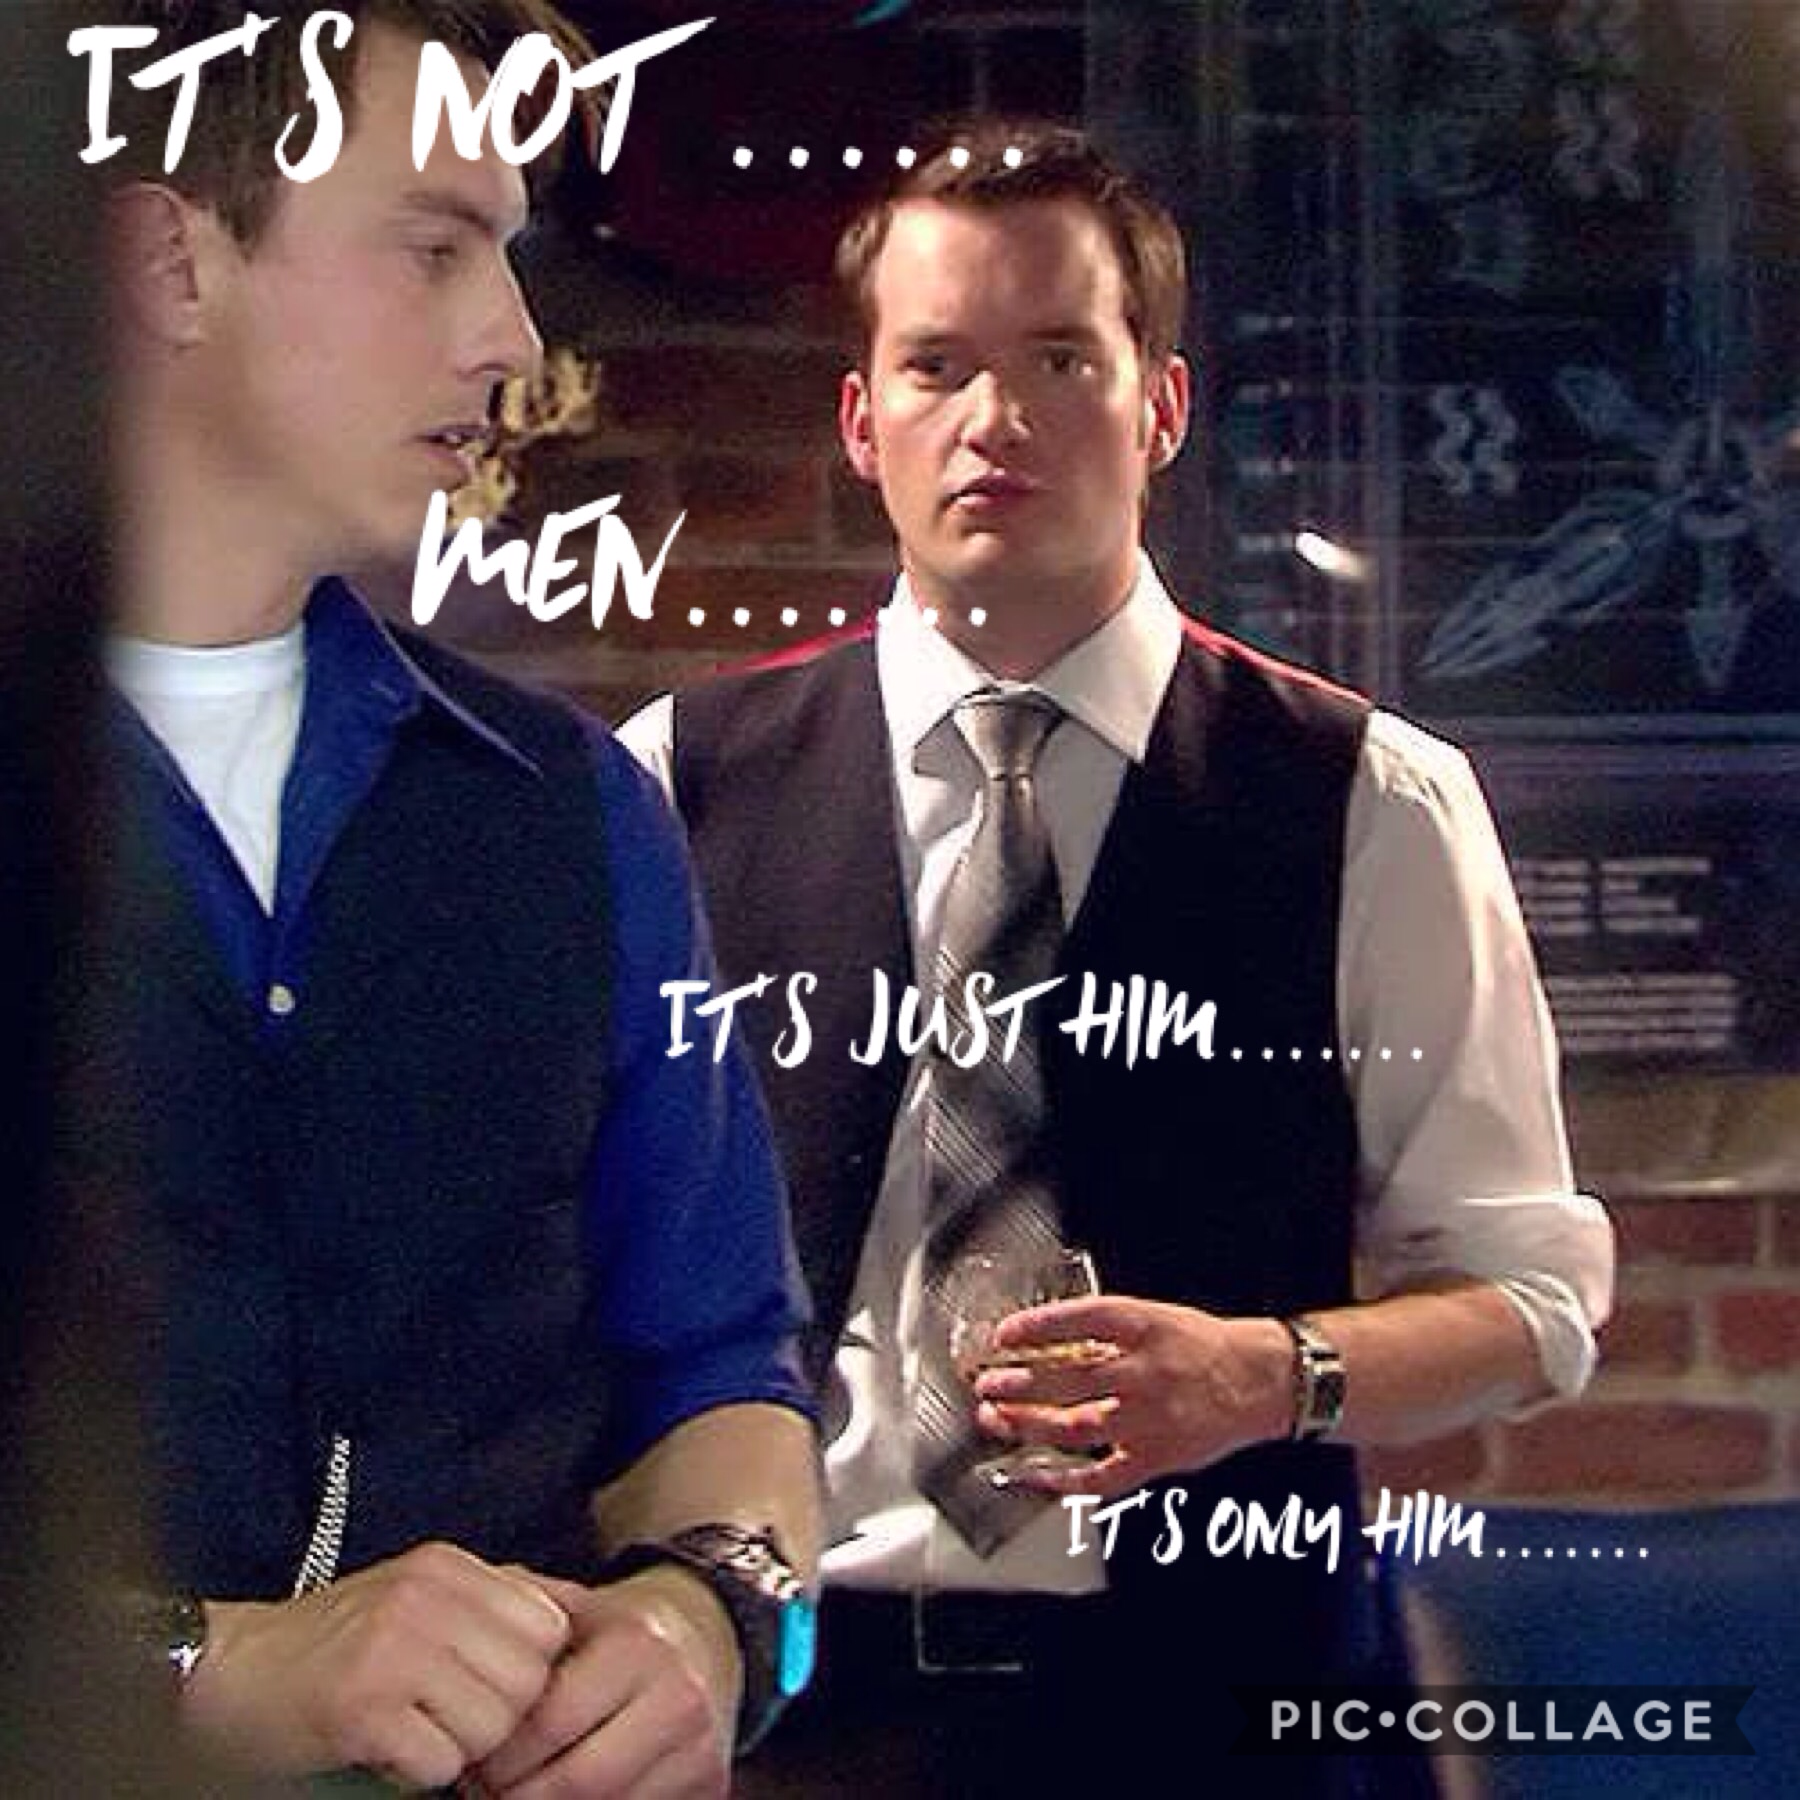 ❤️TAP❤️
I have been rewatching torchwood and I can't stop fangirling over Jack and Ianto!!!!!!!!!! THEY ARE SO CUUUUUUUUUUUTE!